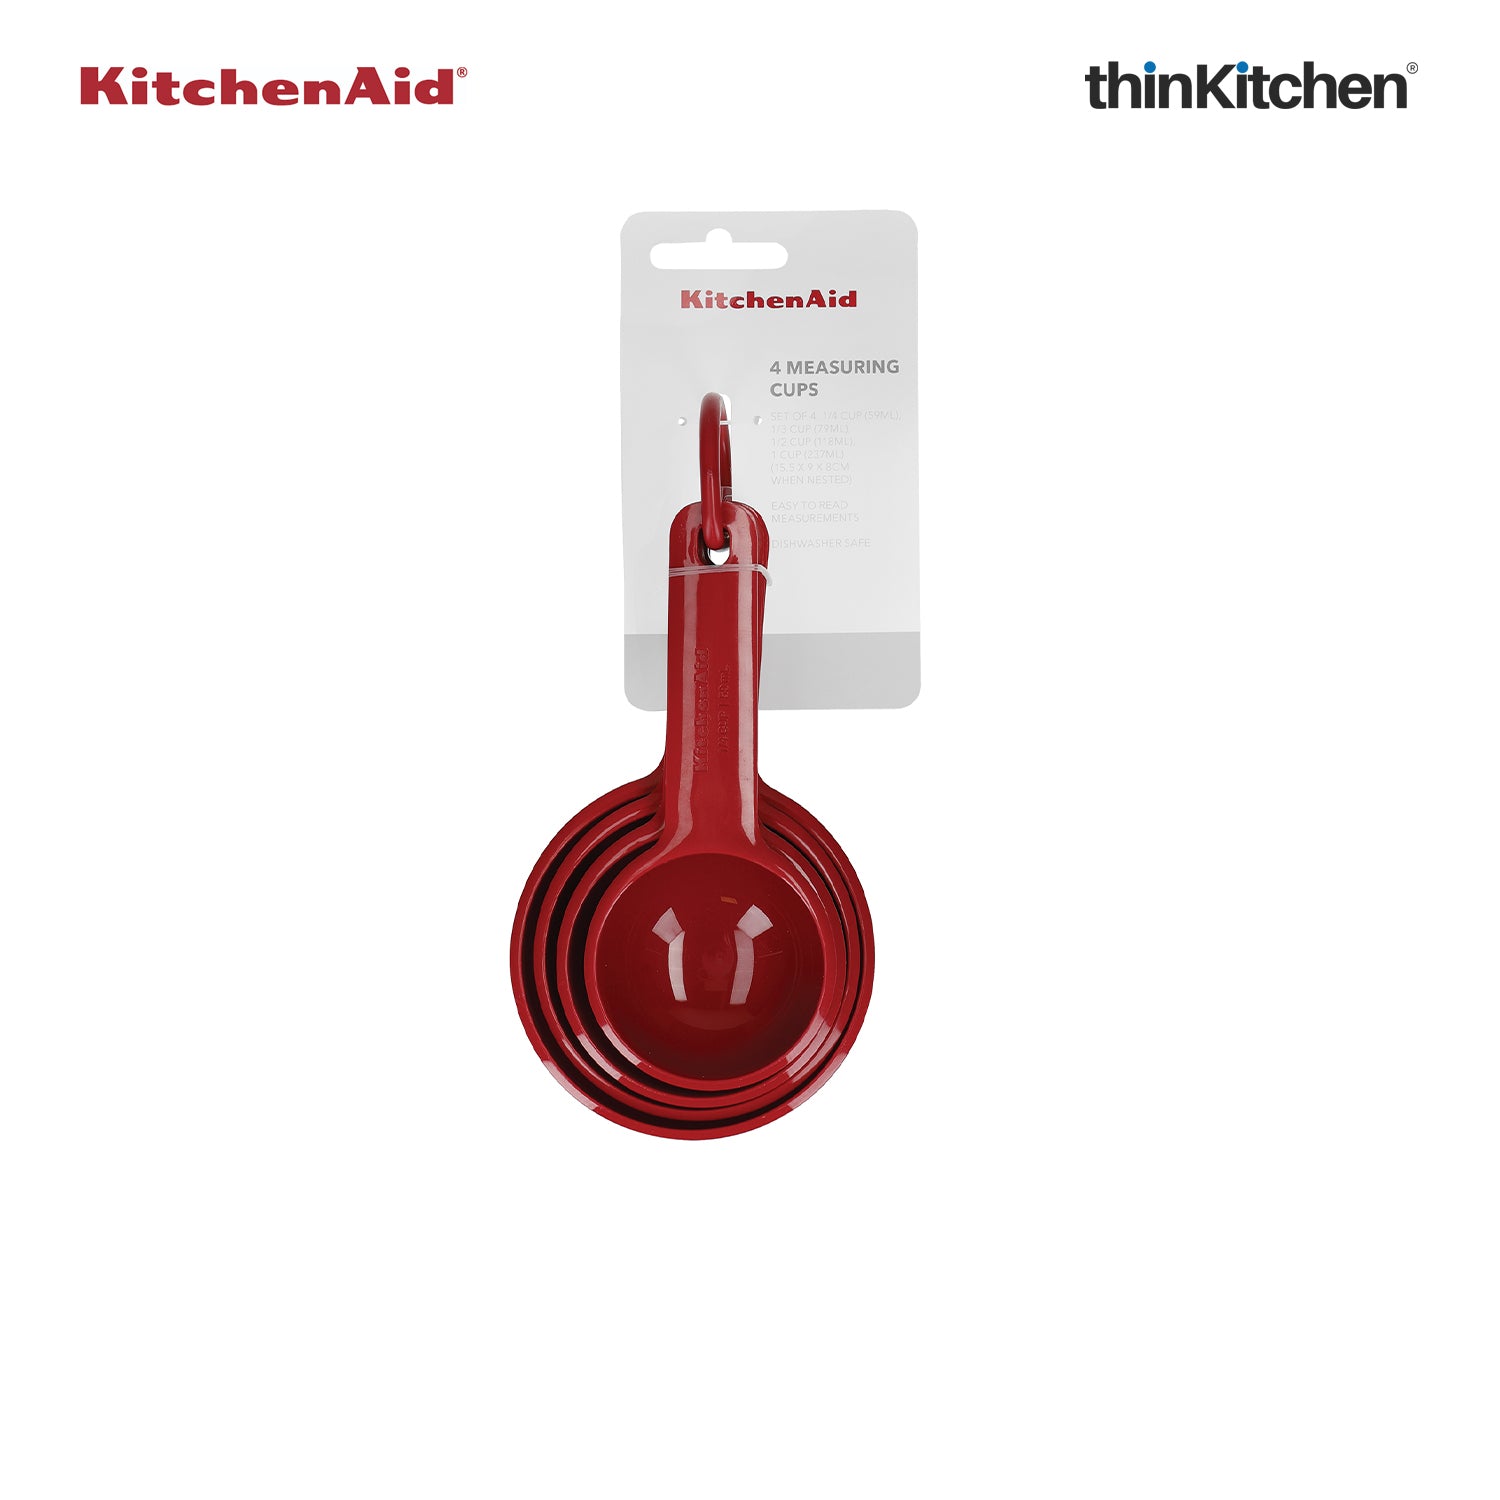 Set of 4 measuring cups, Empire Red color - KitchenAid brand